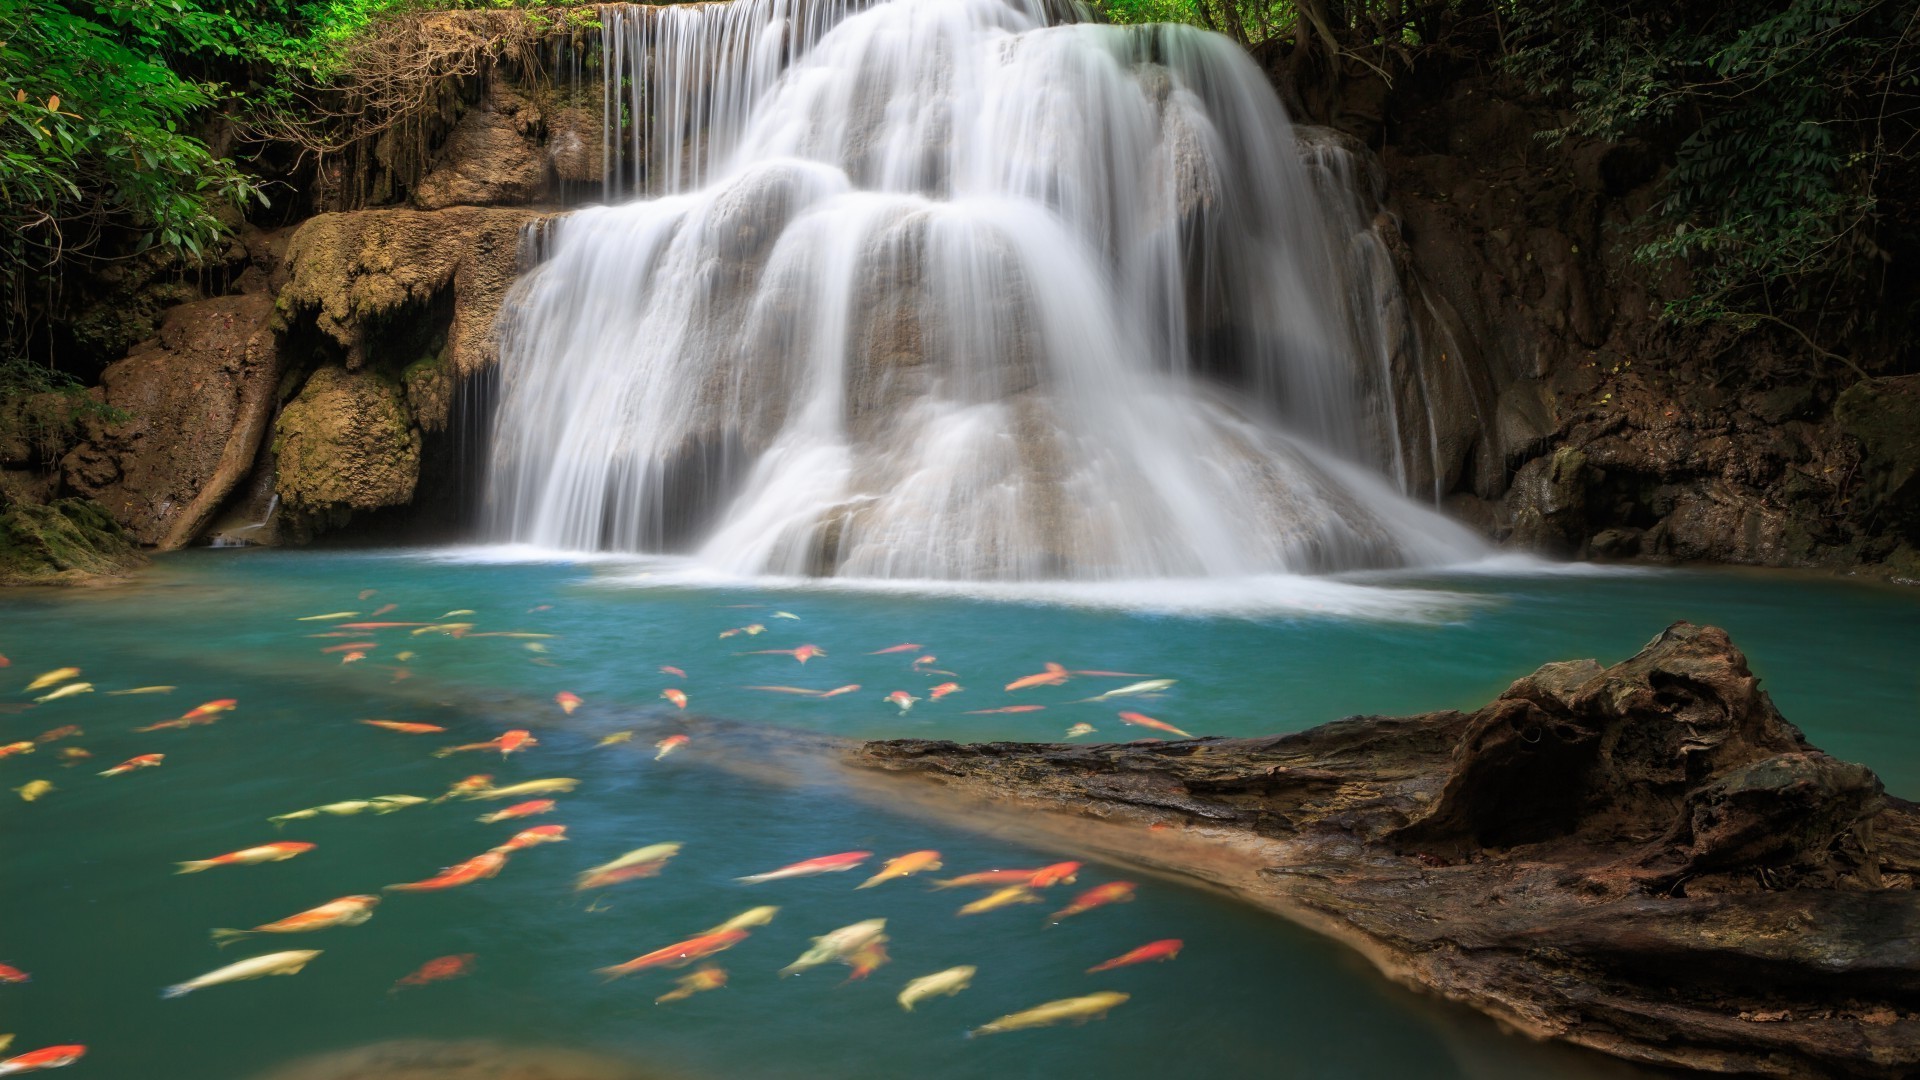 Fish at the waterfall Android wallpapers